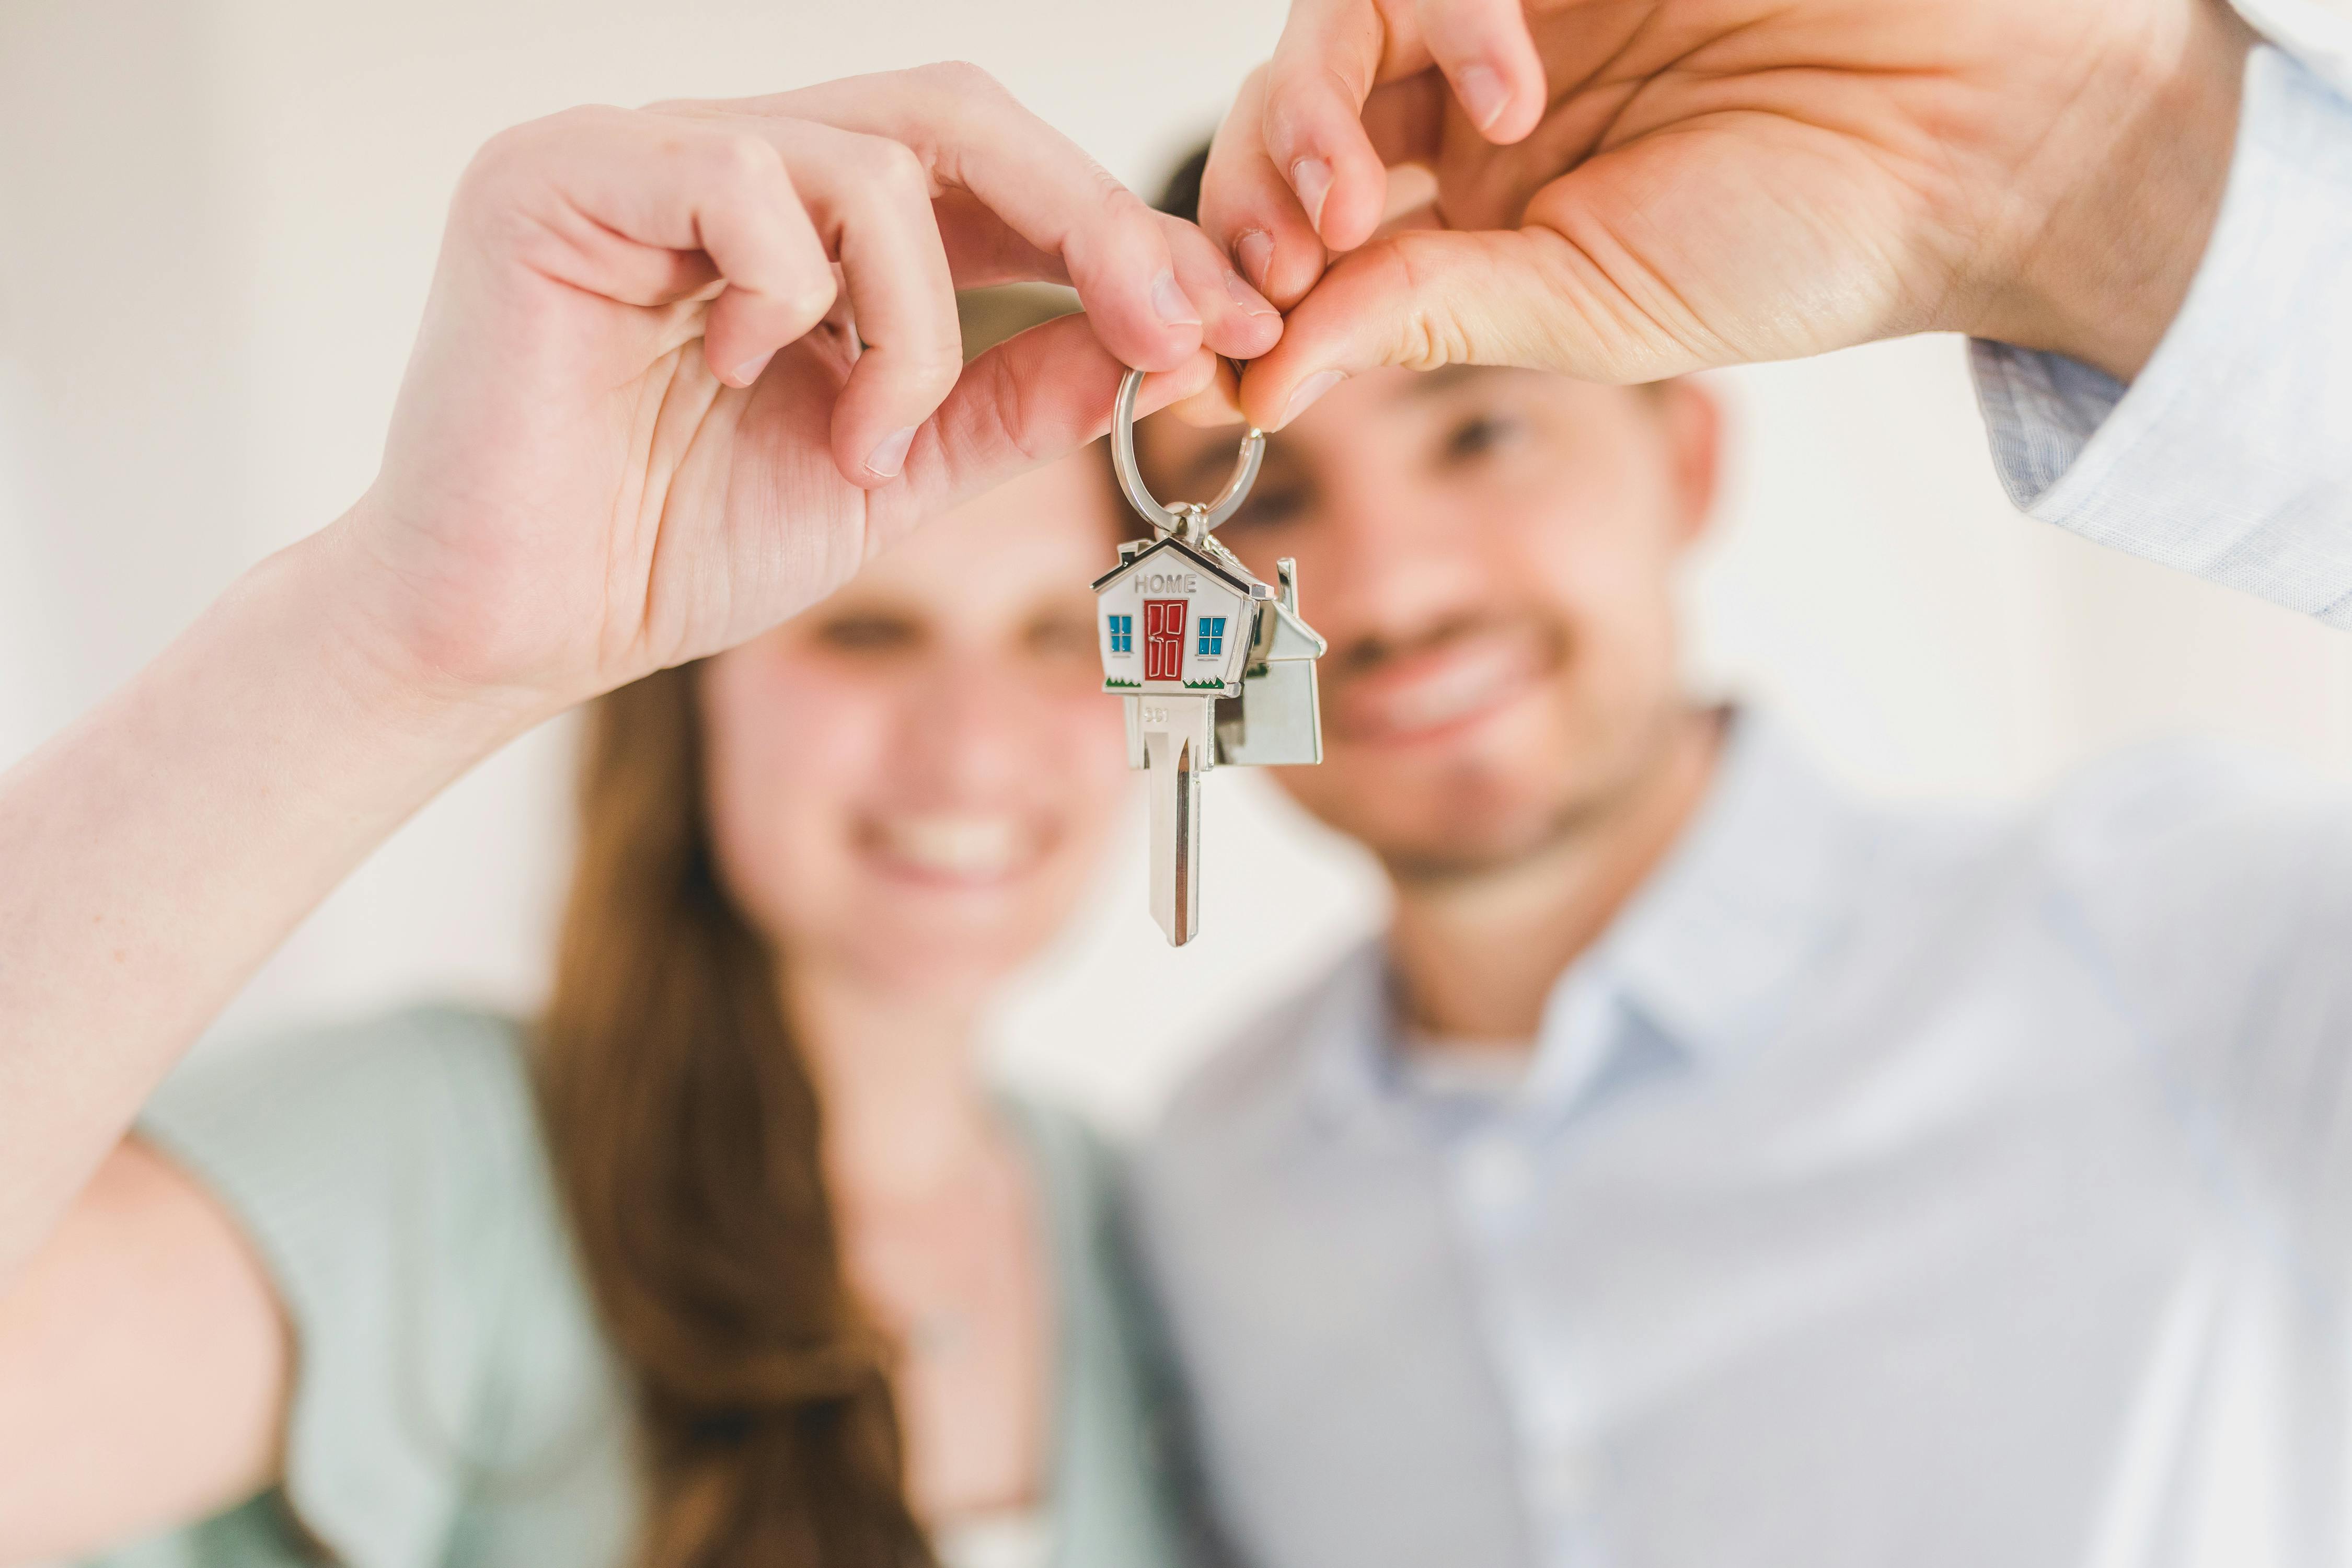 A couple holding a home key  | Source: Pexels